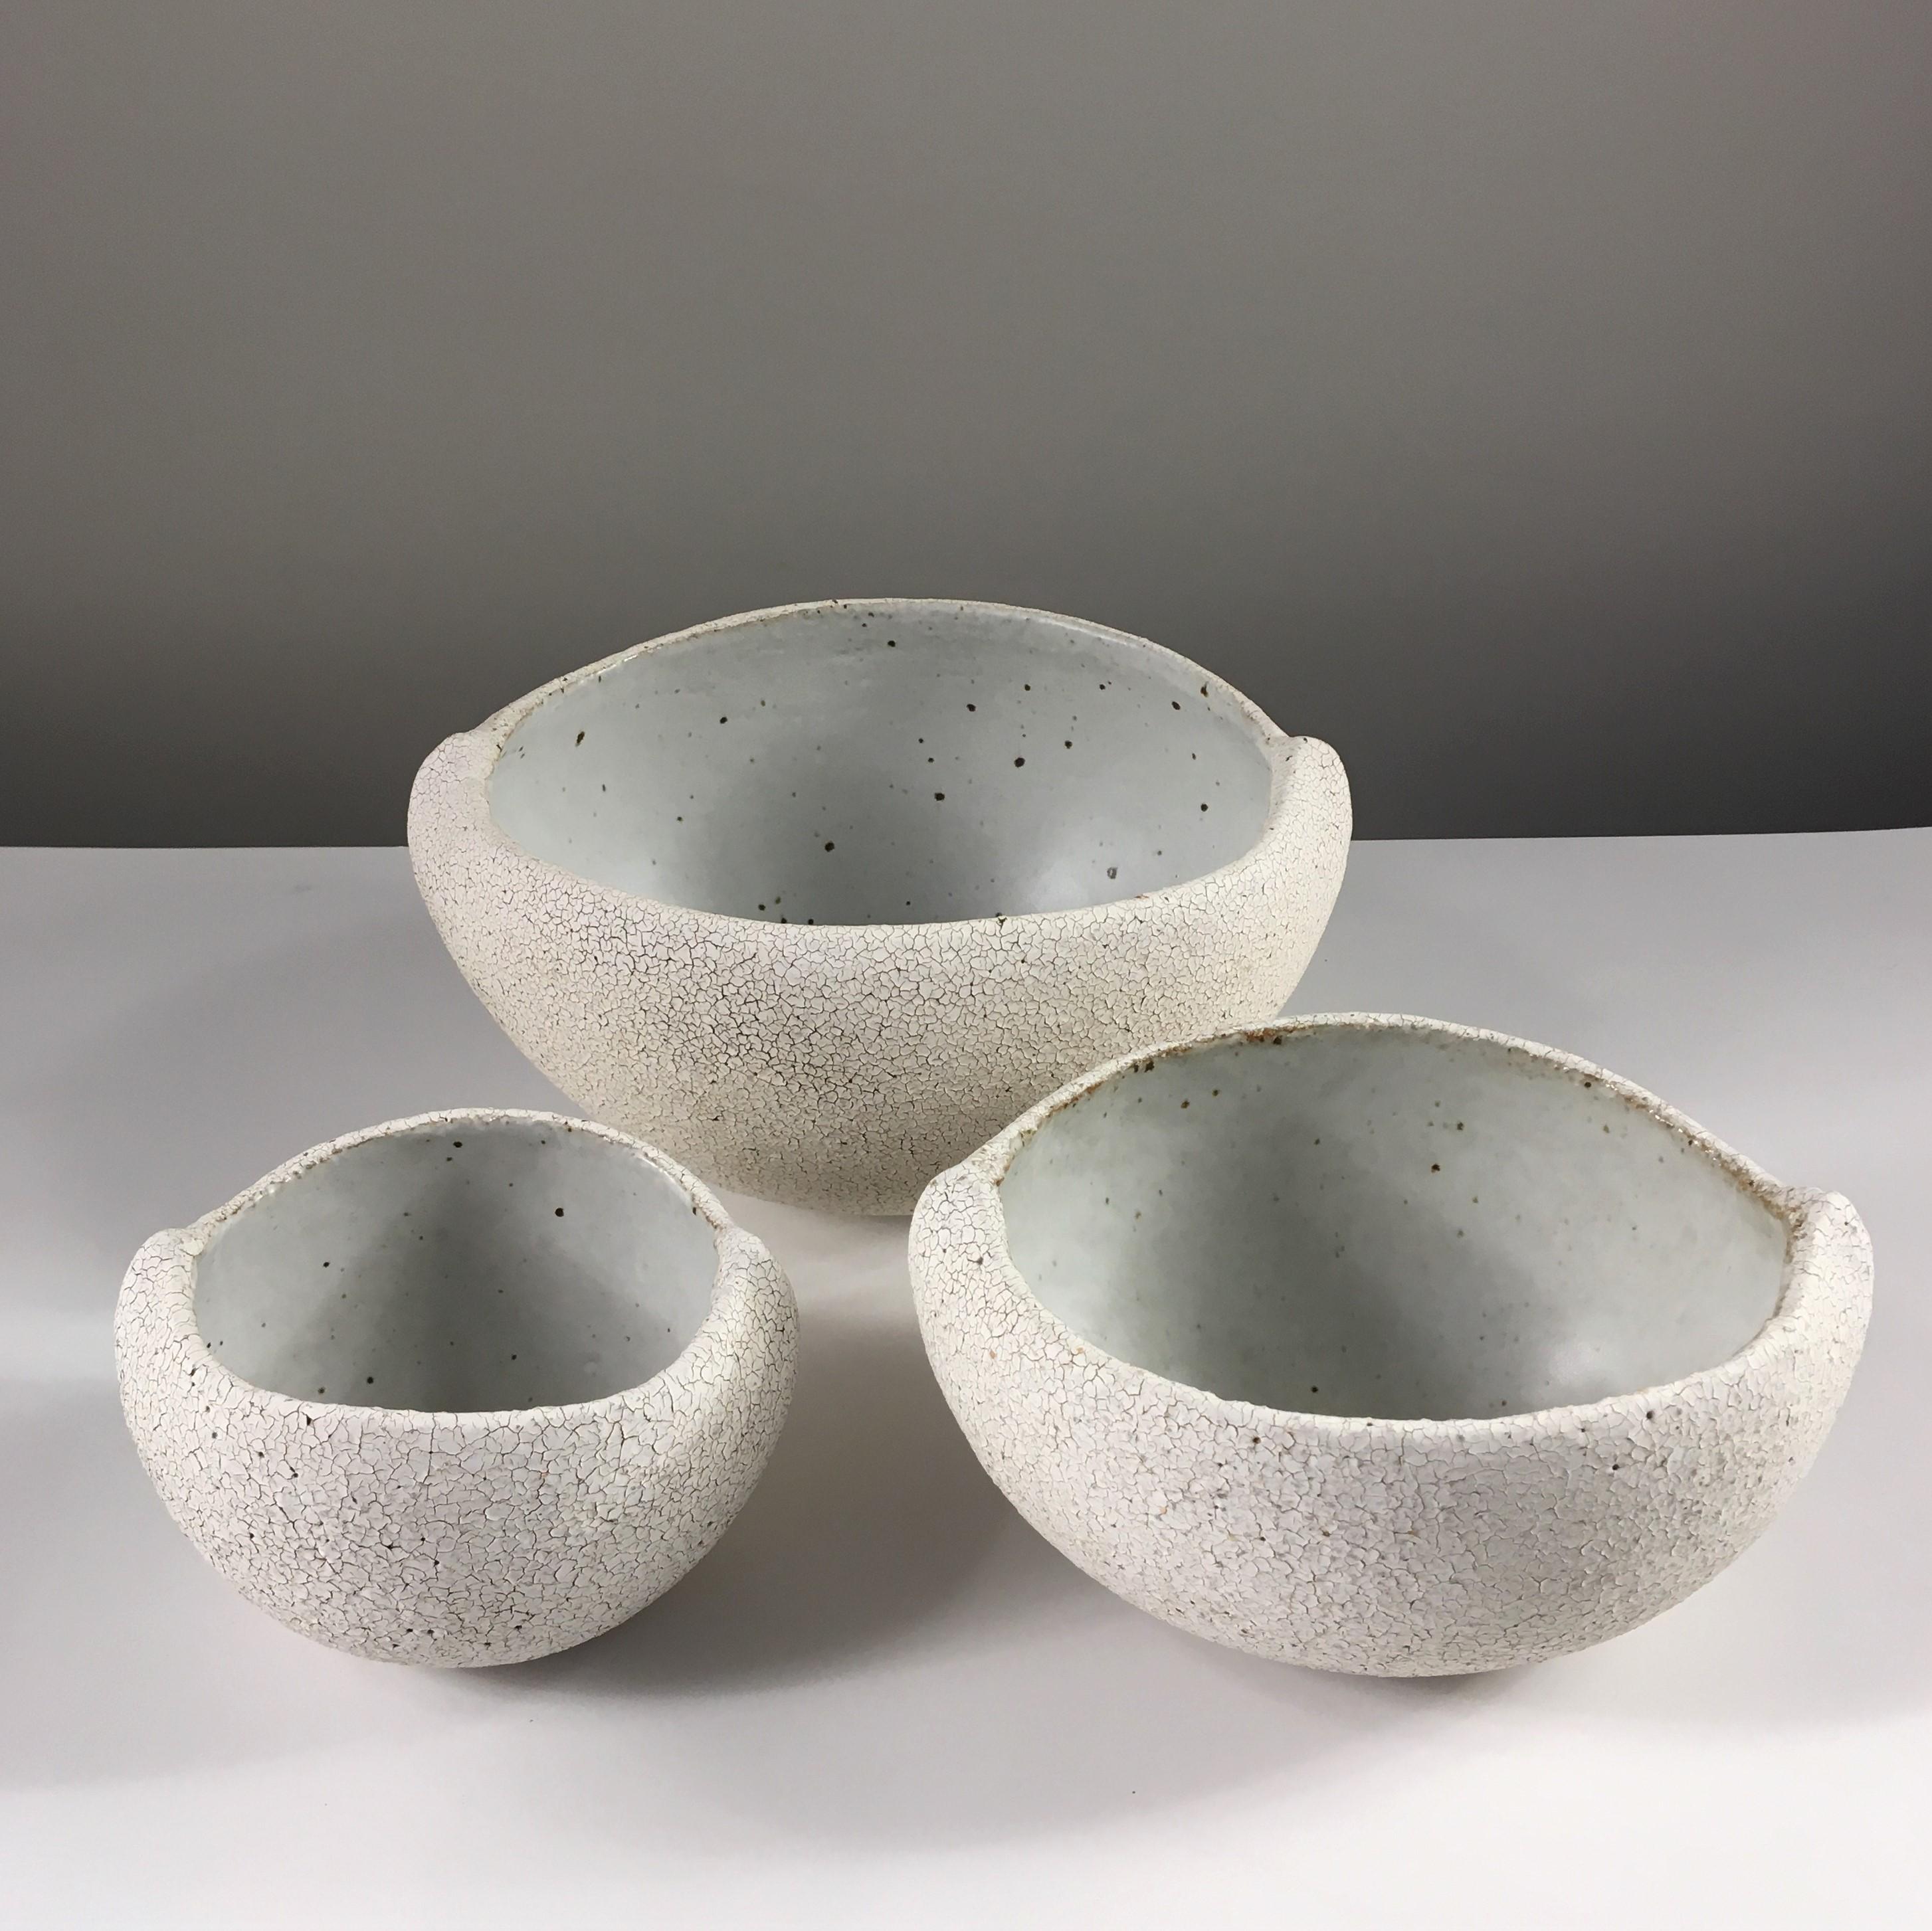 Set of 3 Nested Bowls with Light Grey Inner Glaze by Yumiko Kuga.  Measures: W 9